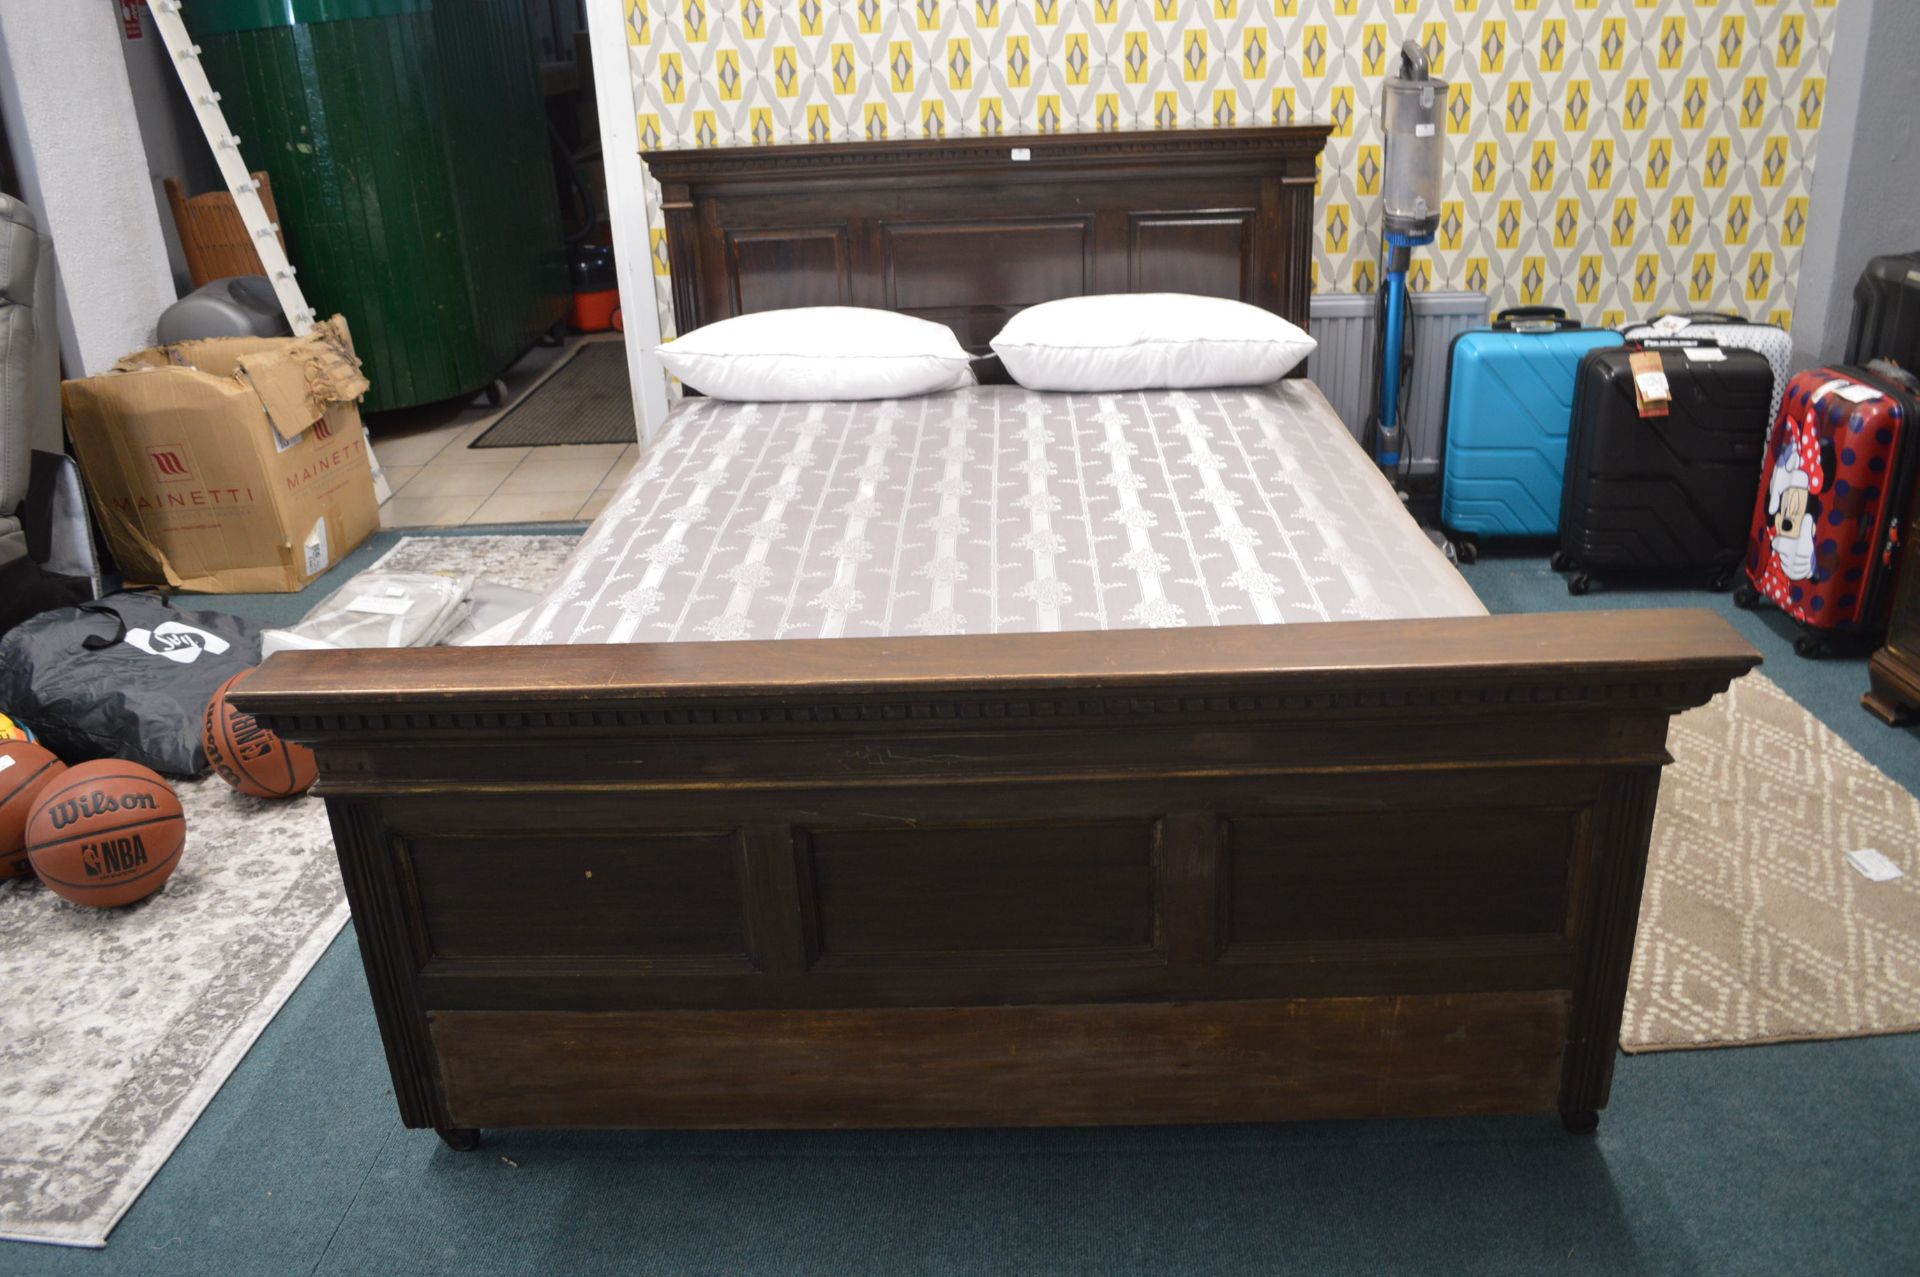 Edwardian Double Bed with Somnus Mattress - Image 2 of 2